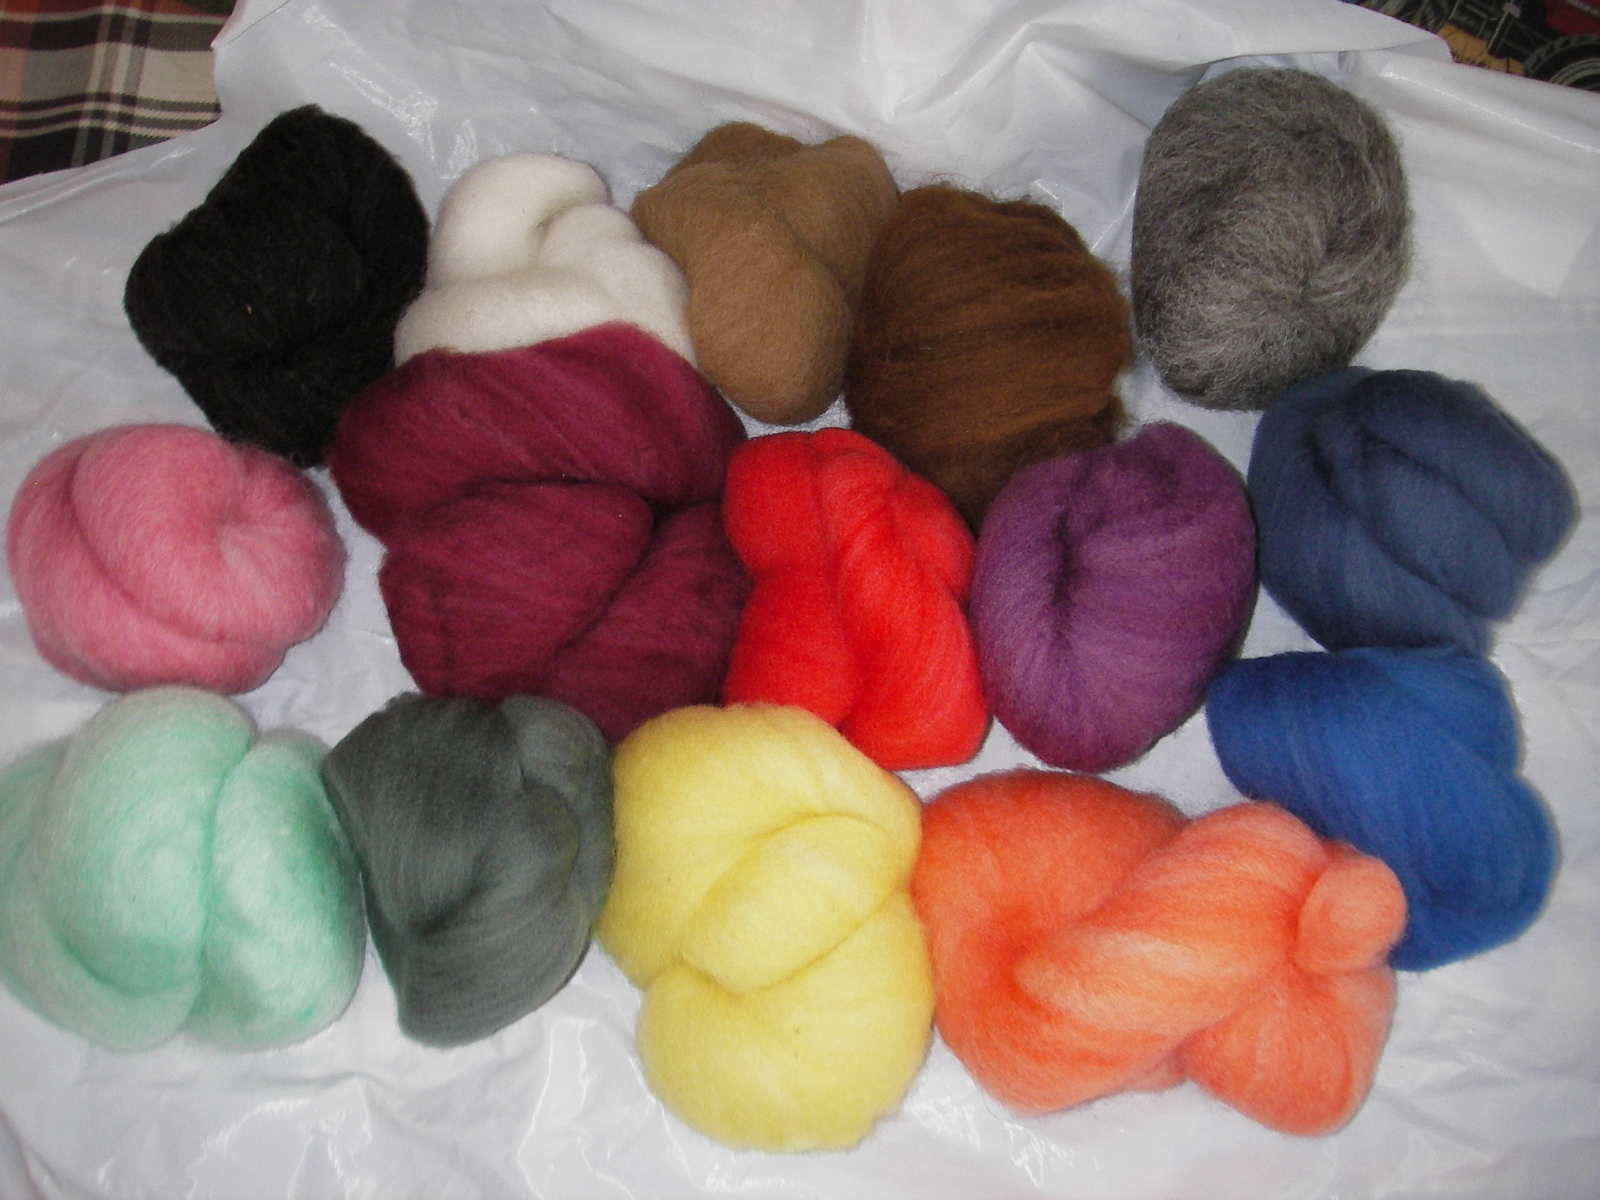 The variety of dyed wool available at Dry Creek Ranch!